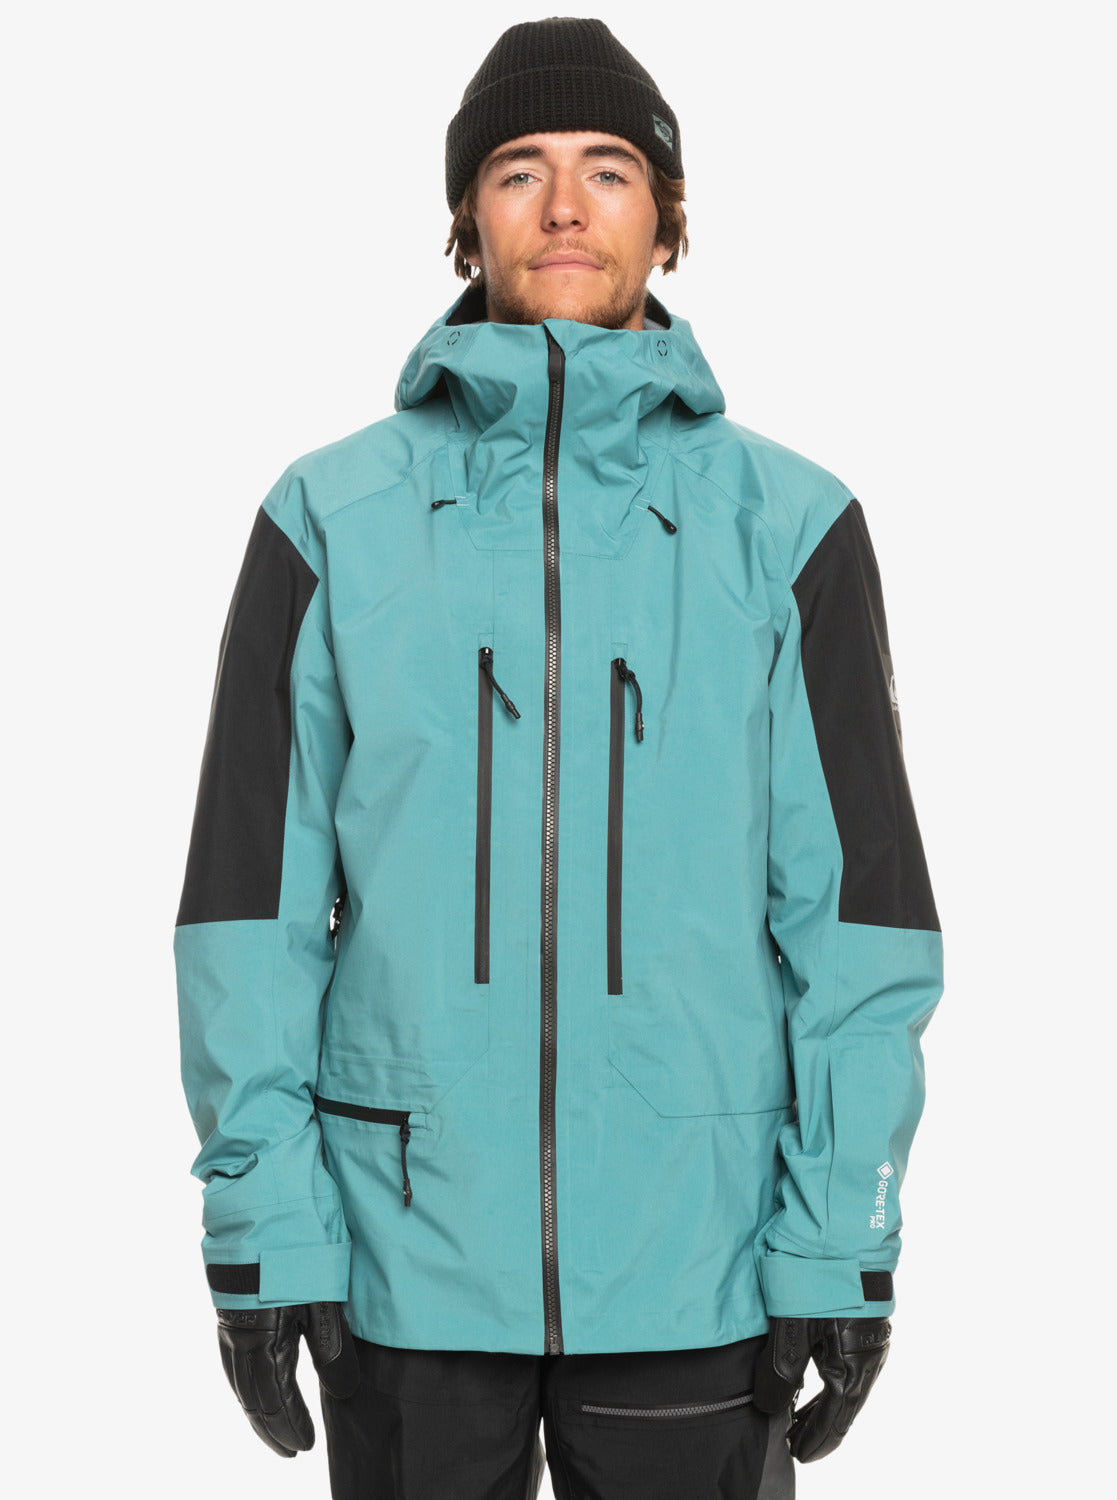 Highline Pro Travis Rice 3L Gore-Tex® Technical Snow Jacket - Brittany